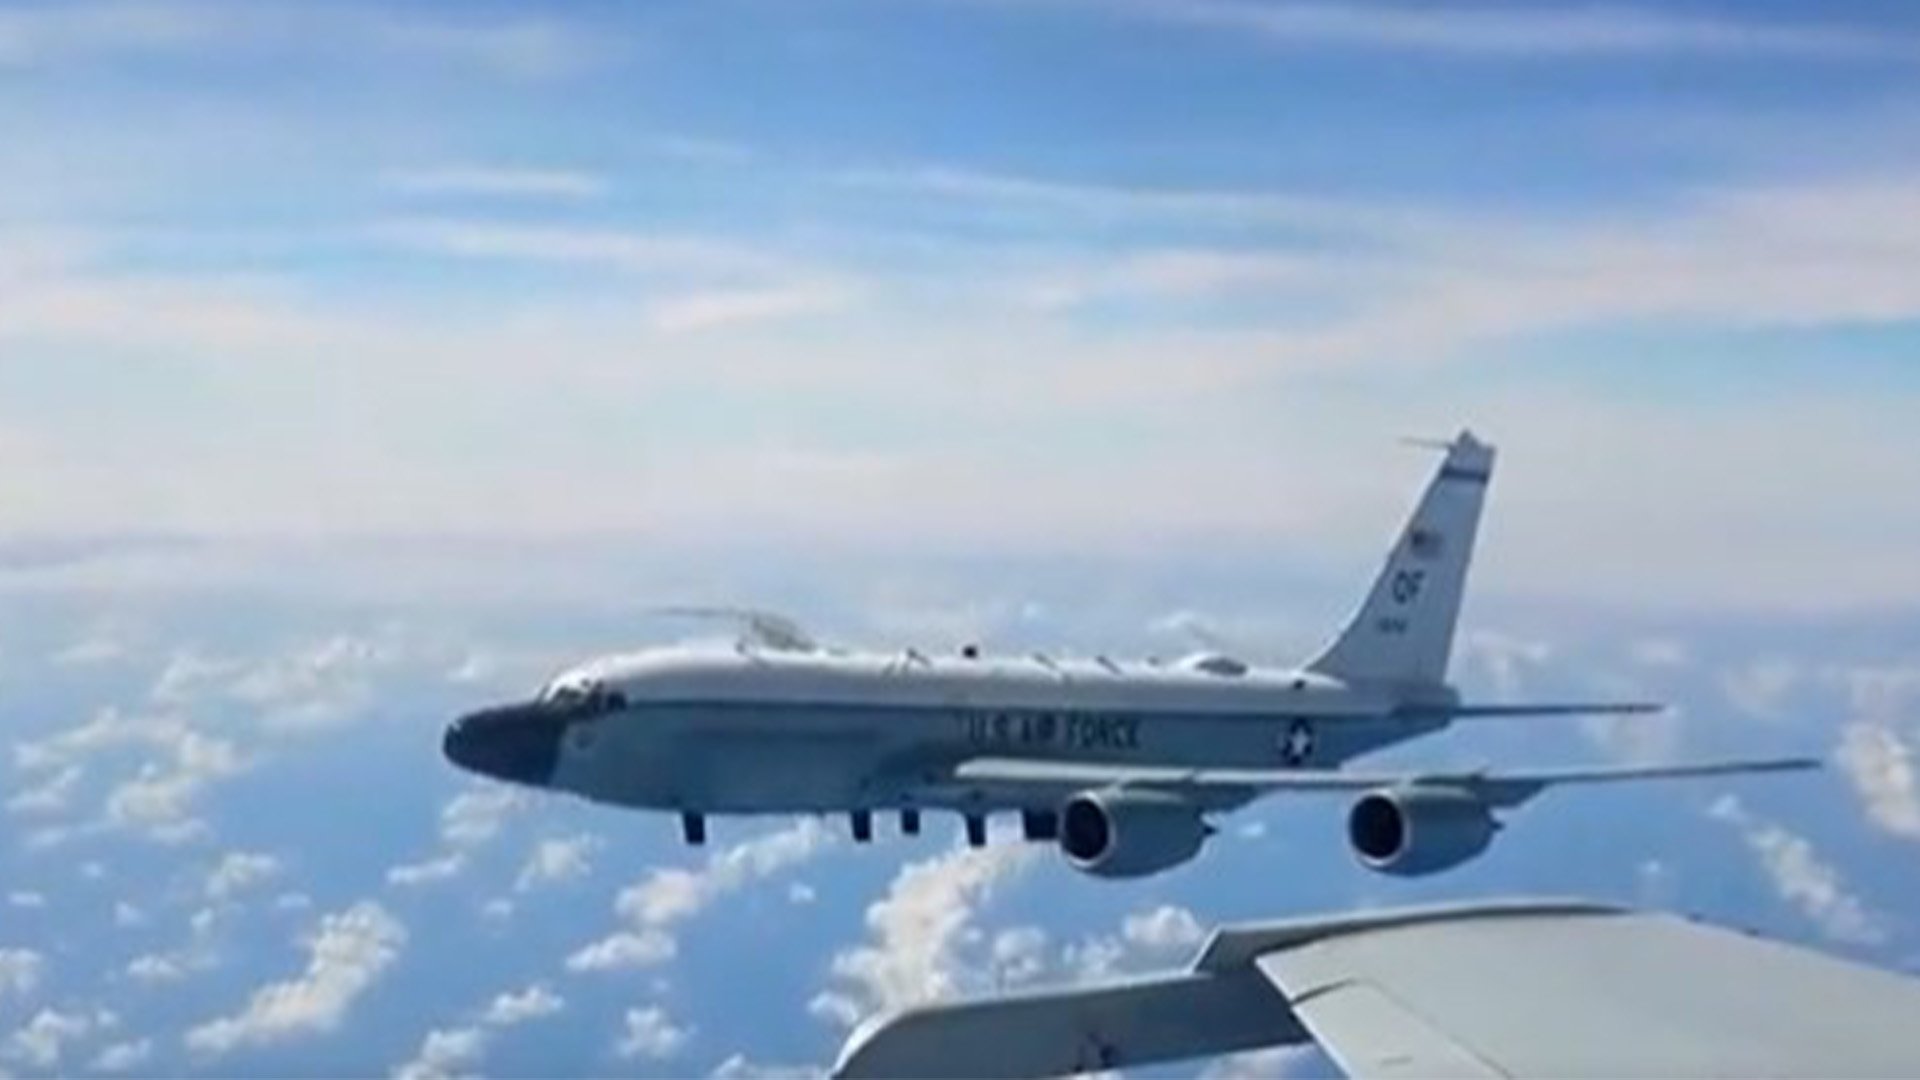 On Saturday, Dec. 31, China’s Southern Theater Command released an 18-second video on social media that claimed a US Air Force RC-135V Rivet Joint reconnaissance aircraft 10 days earlier near the Paracel Islands had “deliberately changed its flight altitude” and “approached our plane dangerously," before "squeezing" it to port. Screenshot from Southern Theater Command video.